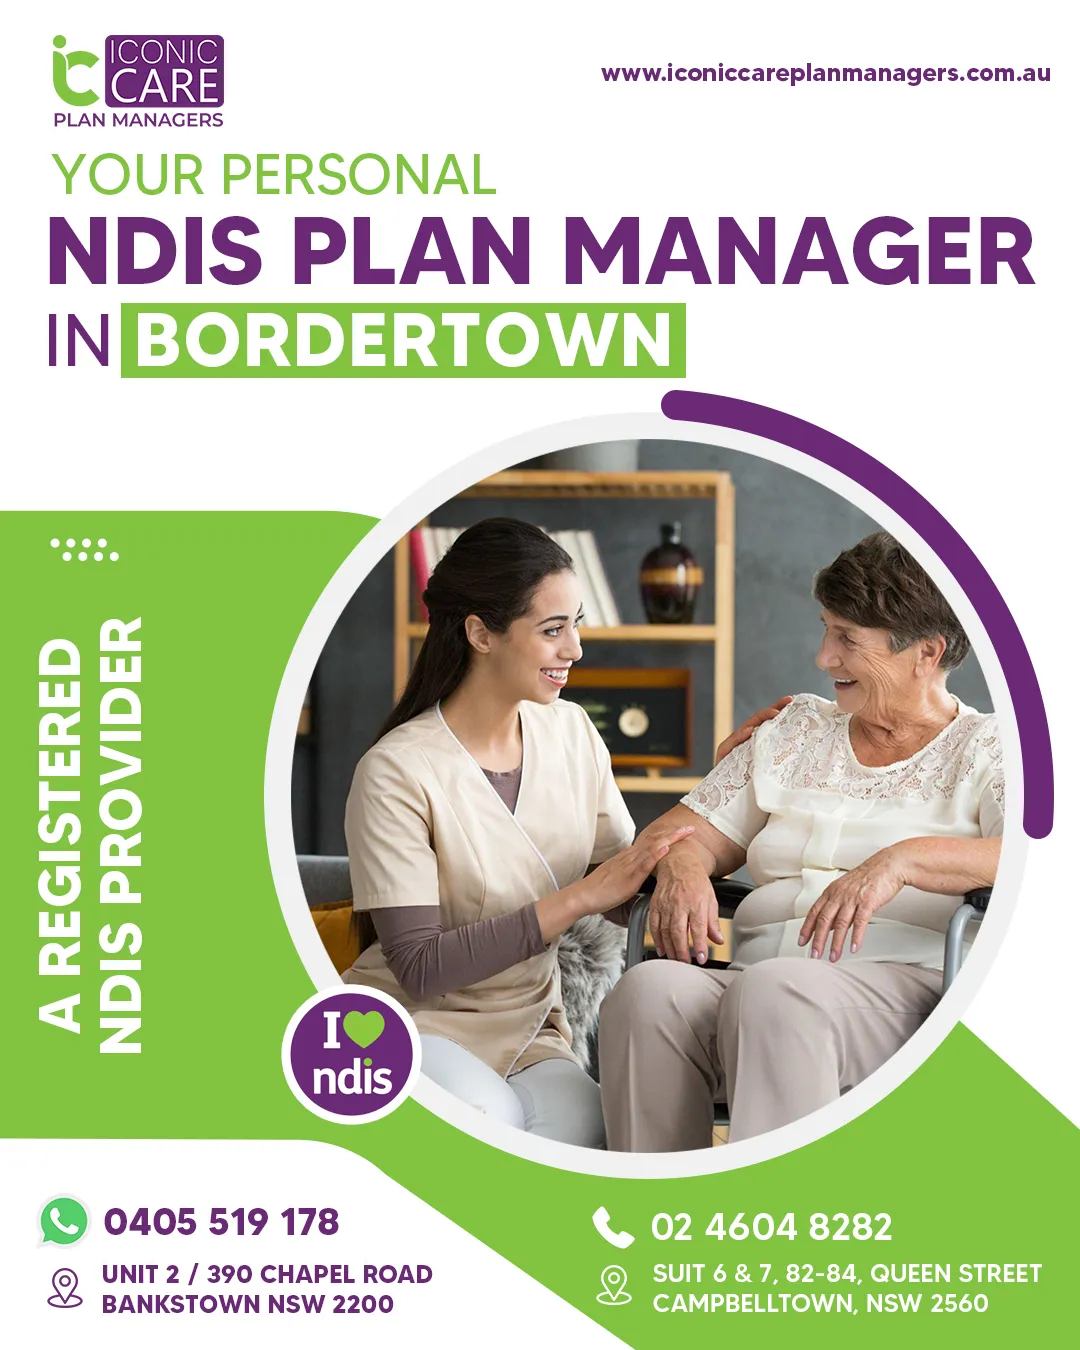 ( get the best ndis plan management services in bordertown)